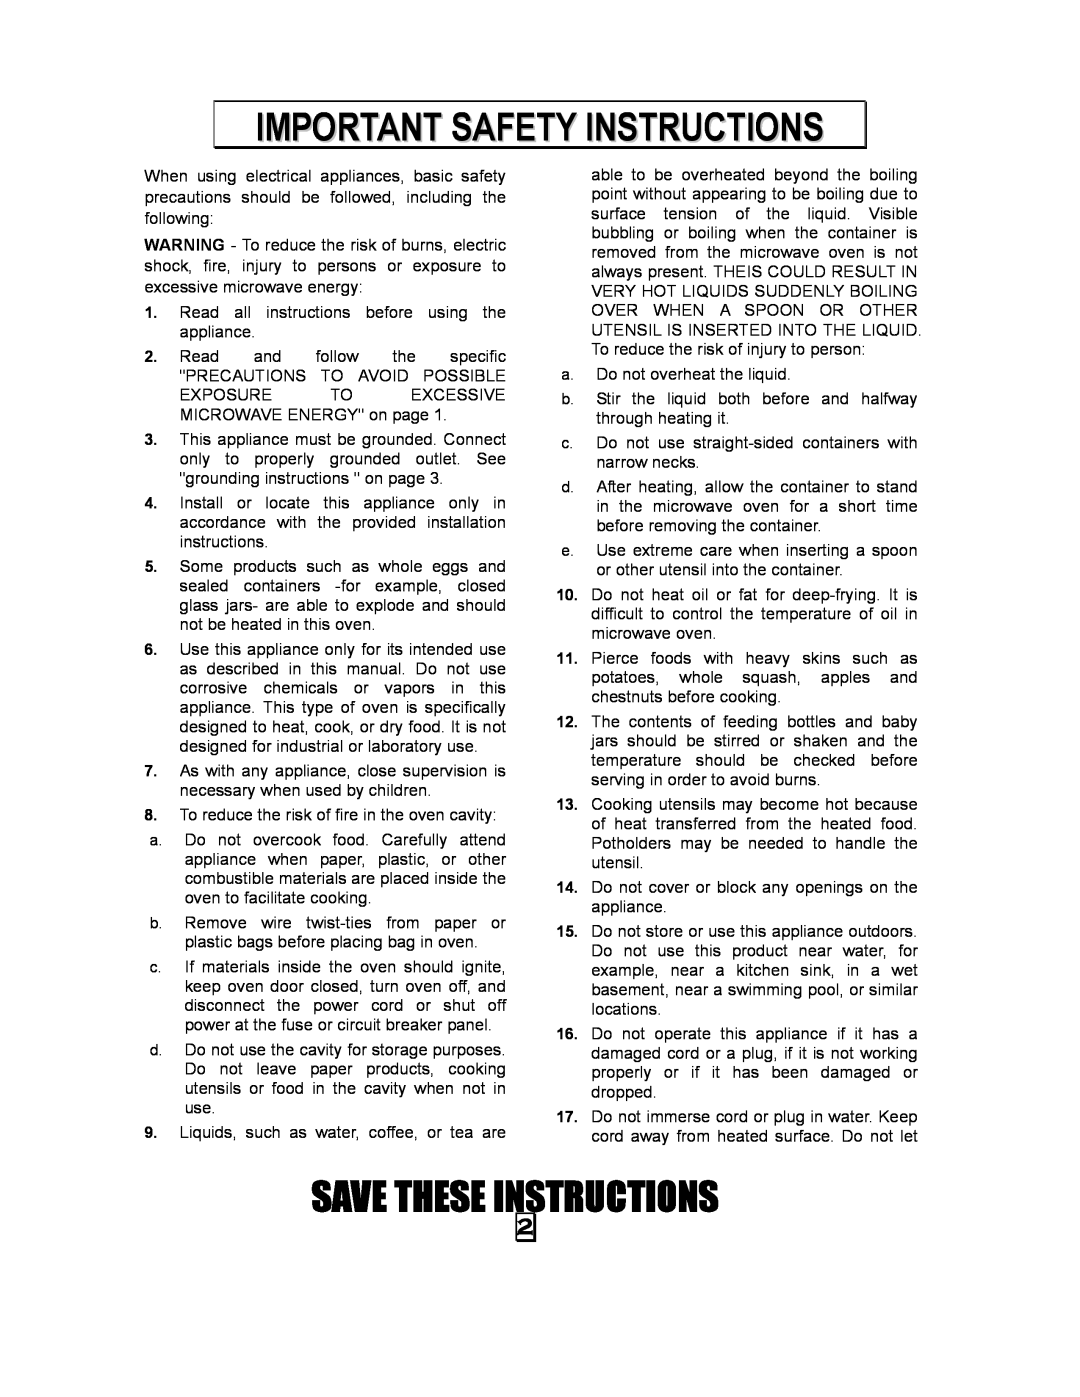 Kenmore 87090 owner manual Save These Instructions, Important Safety Instructions 